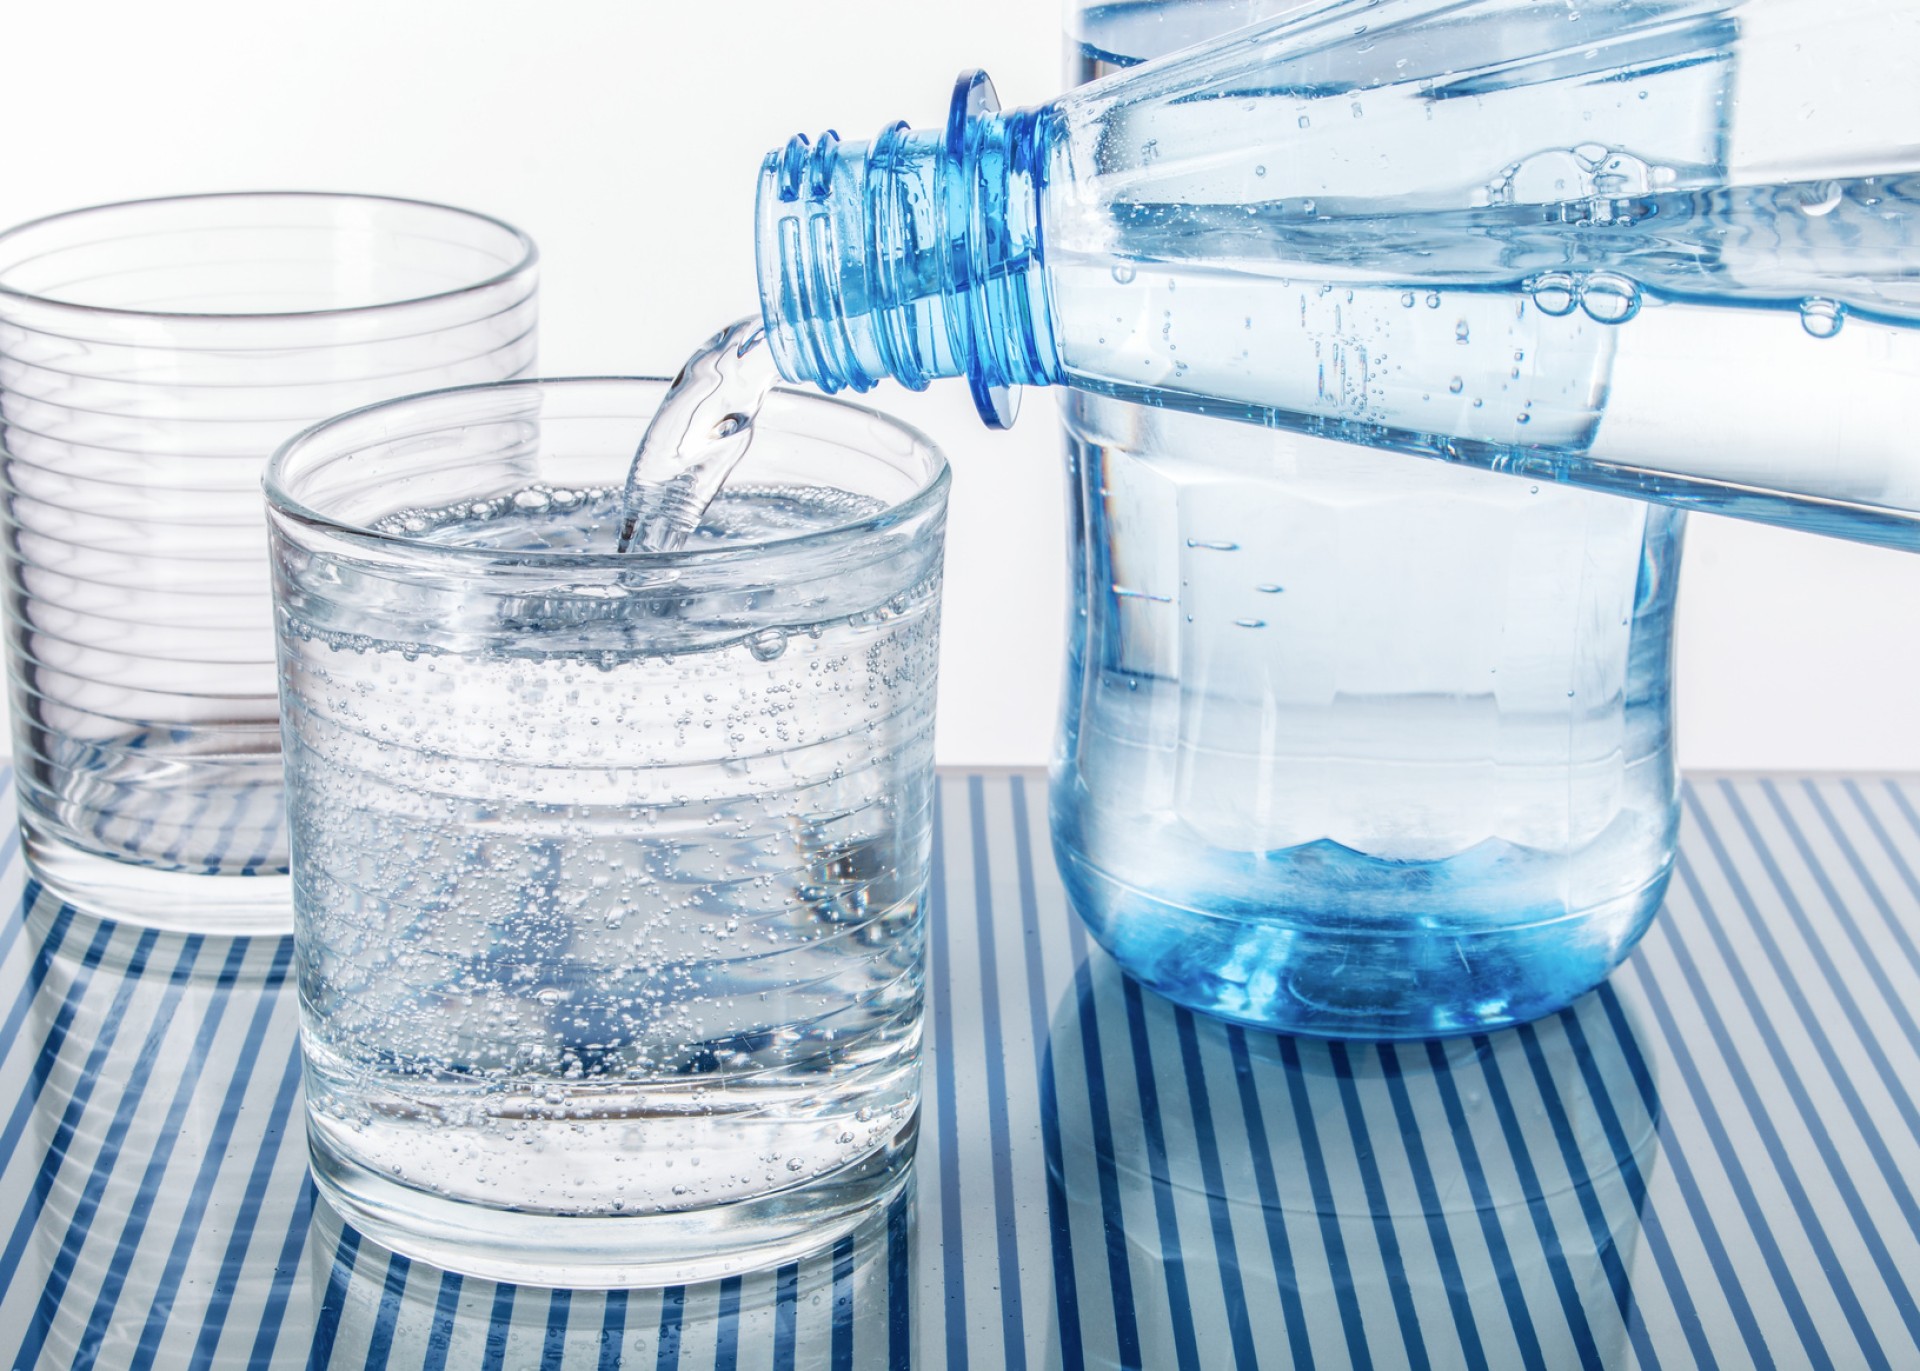 Two glasses are filled with different water to illustrate the different water treatment requirements